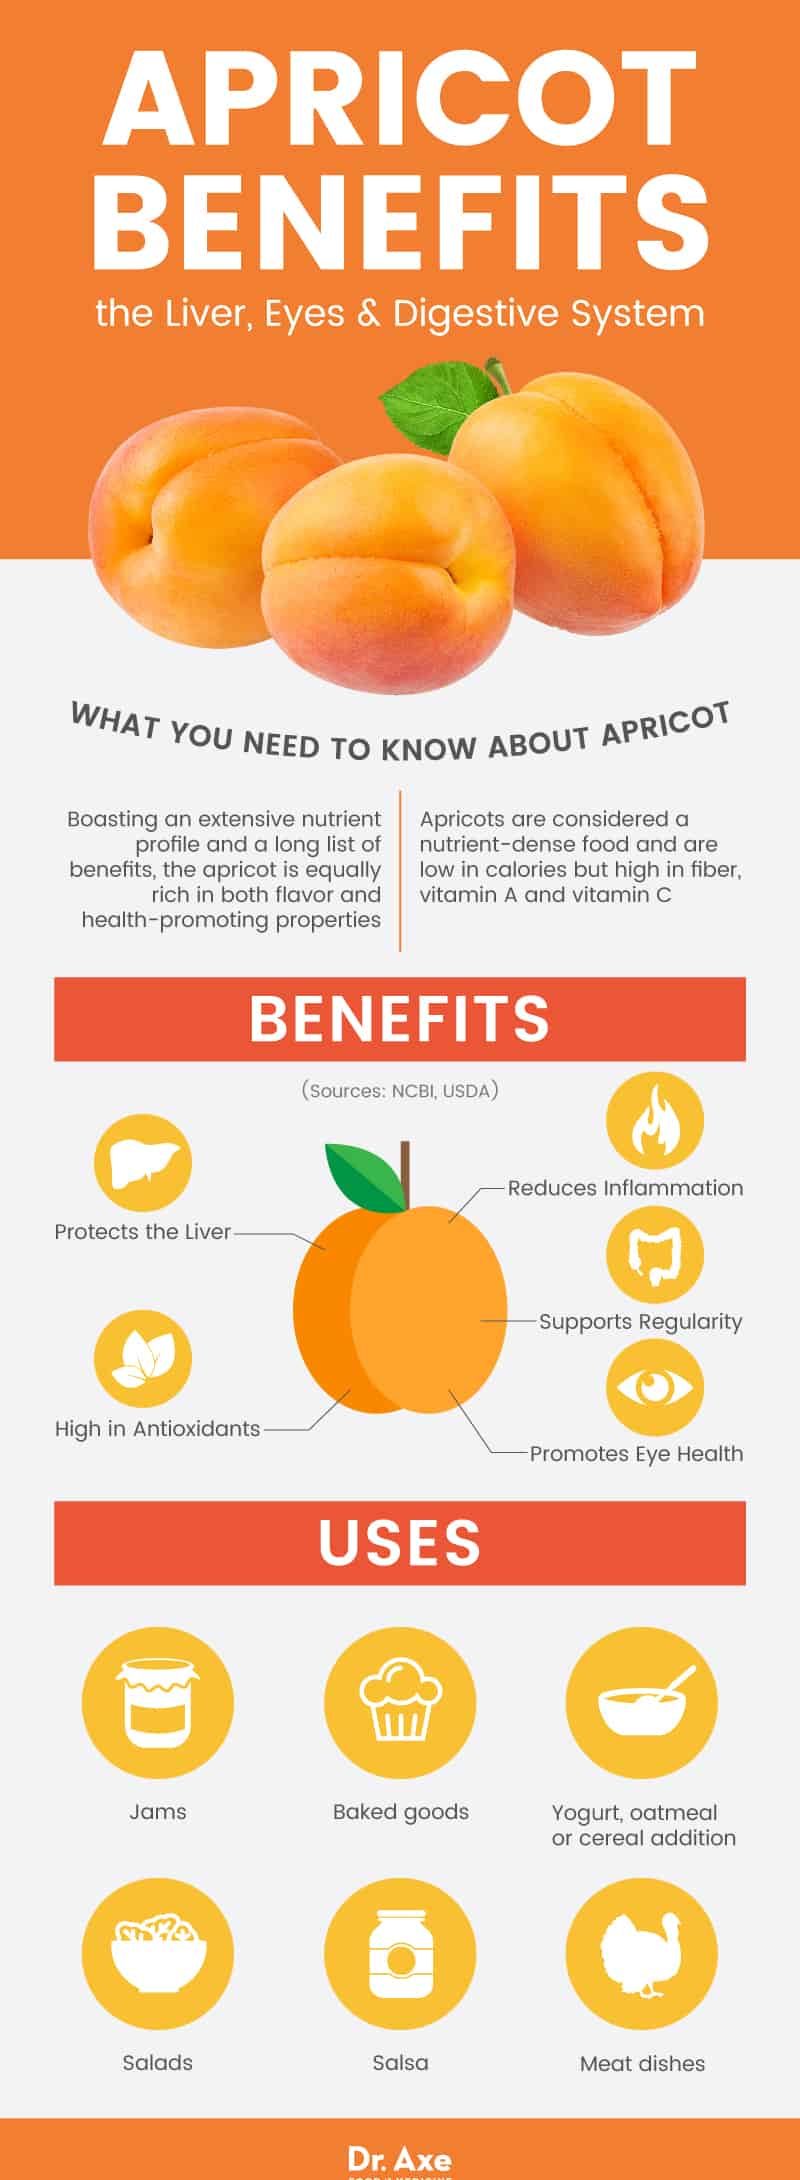 Apricot benefits - Dr. Axe